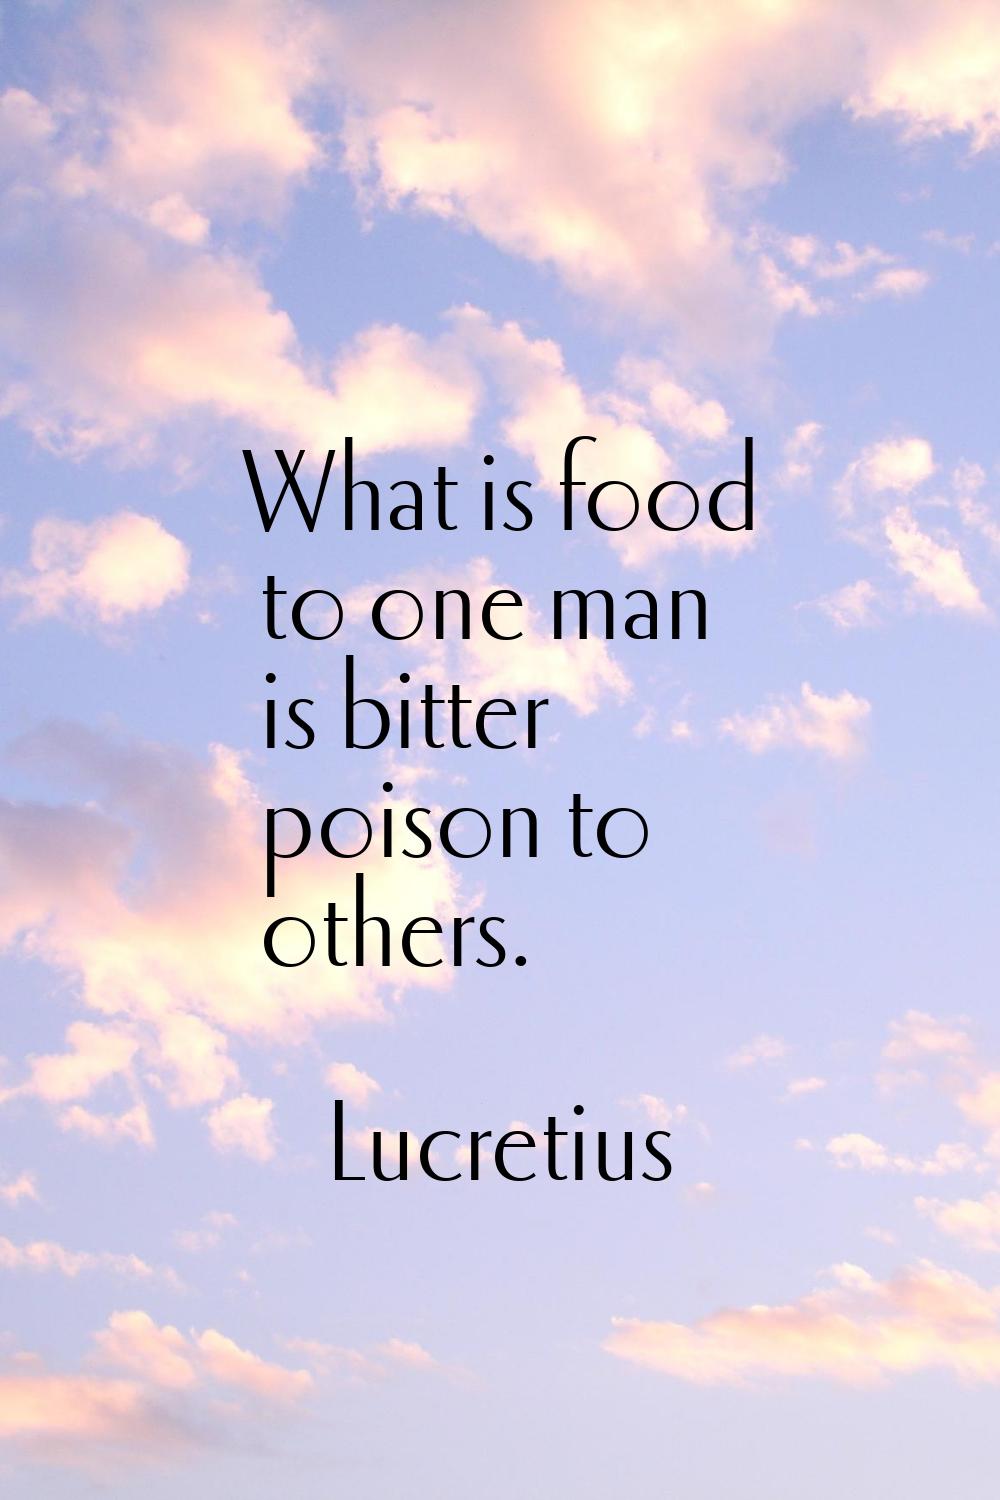 What is food to one man is bitter poison to others.